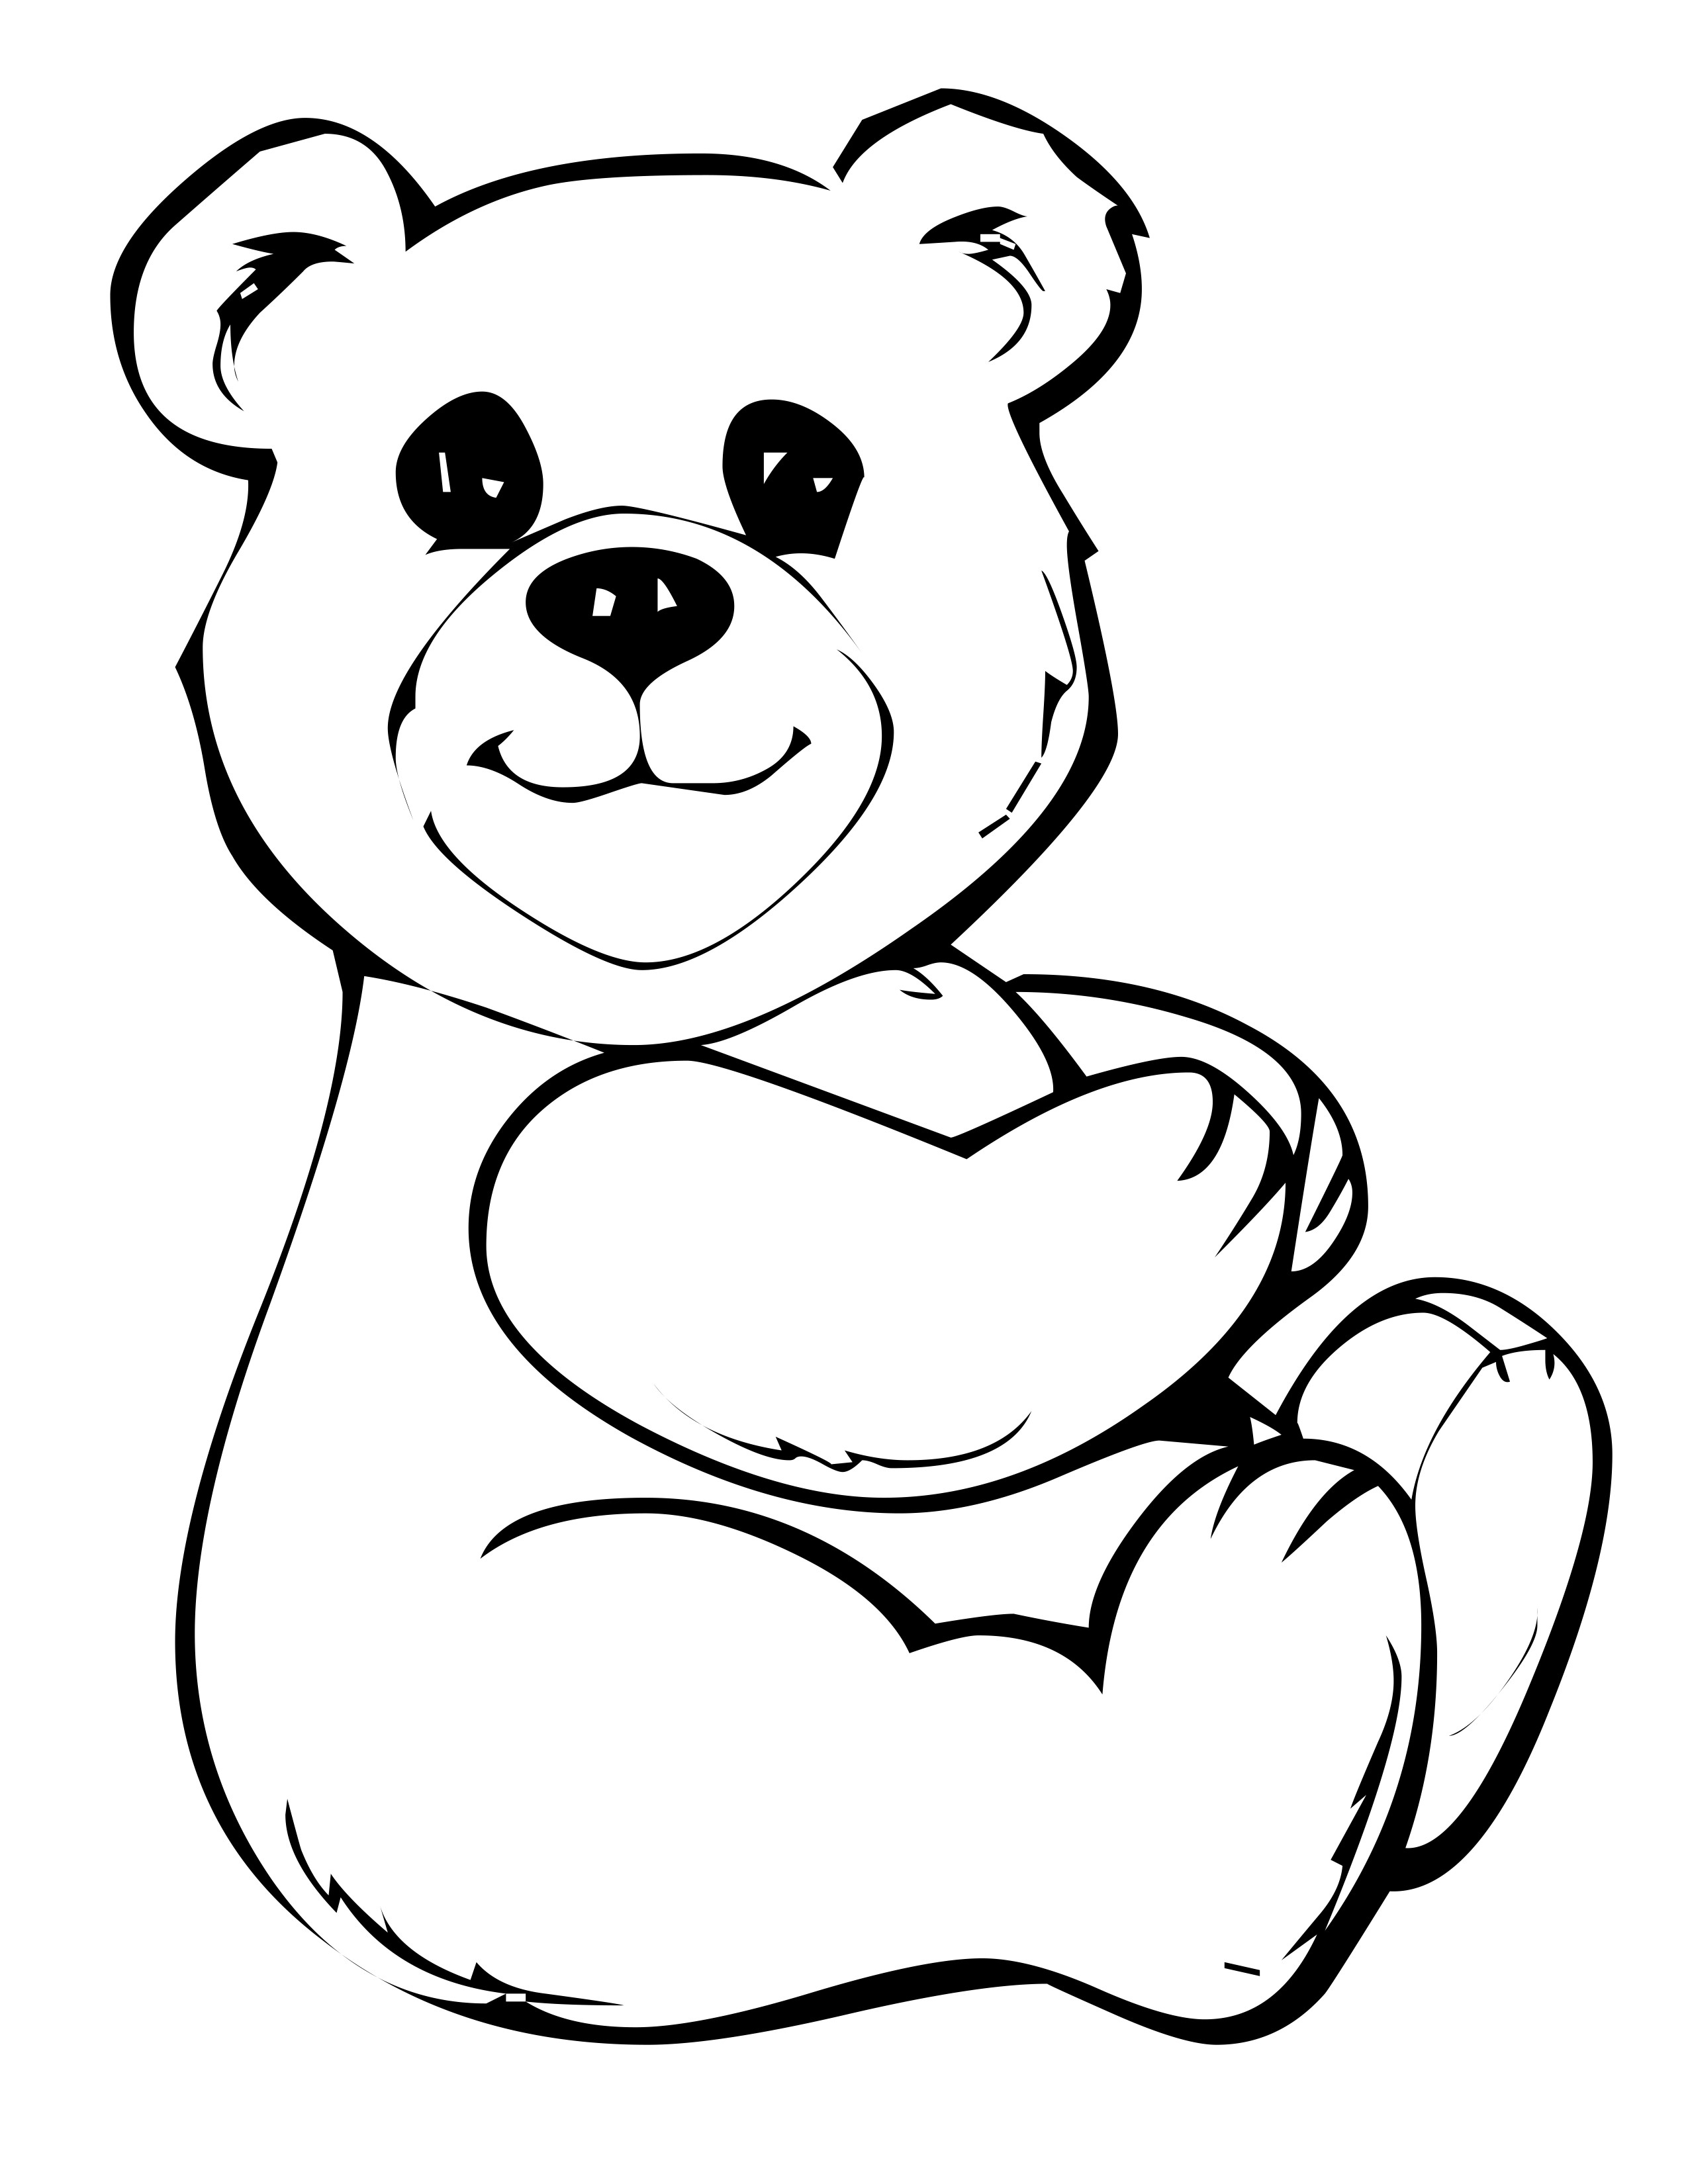 Bears Coloring Pages Free Printable Teddy Bear Coloring Pages For Kids